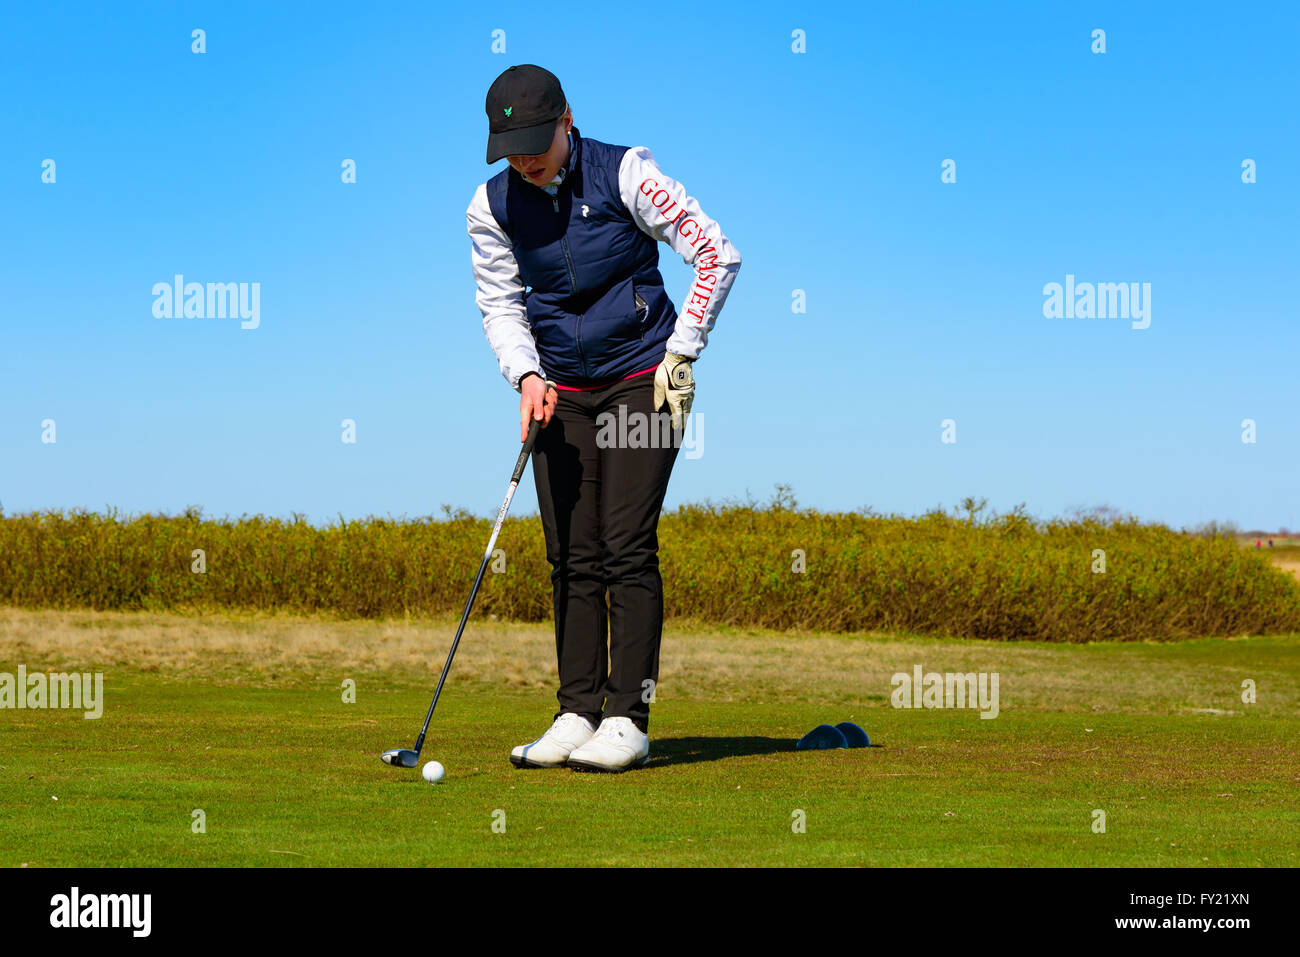 Skanor, Sweden - April 11, 2016: Female young adult golfer preparing her swing at tee. She is concentrating and focusing on her Stock Photo